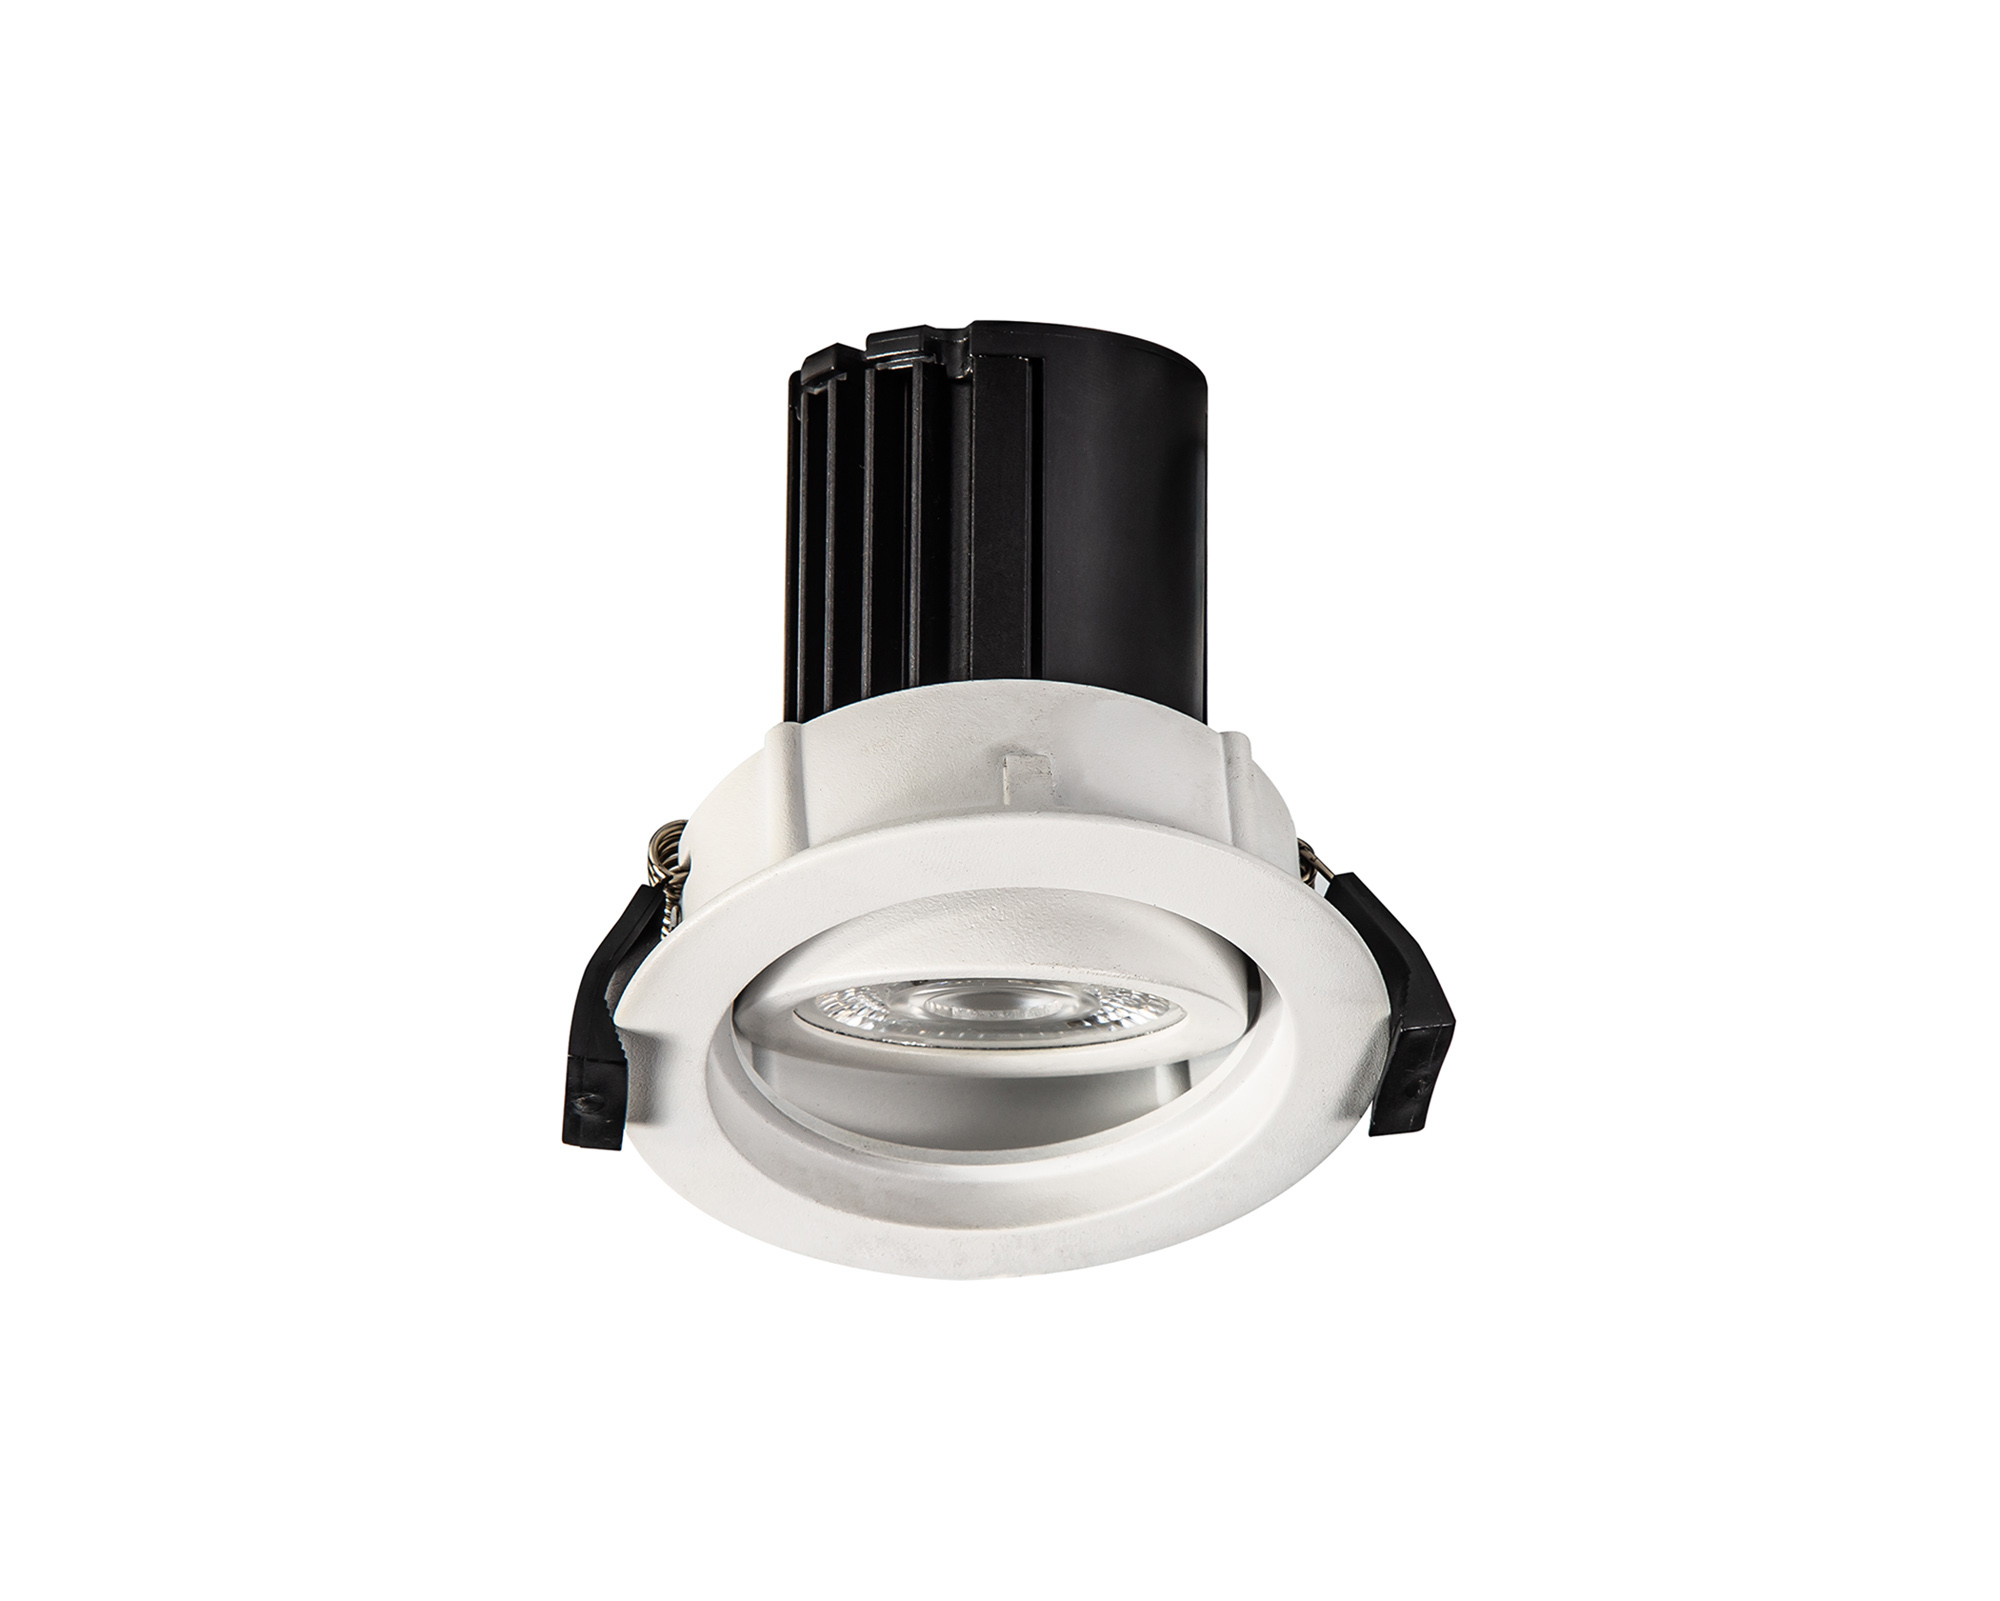 DM201240  Beppe A 10 Tridonic powered 10W 2700K 750lm 12° CRI>90 LED Engine White Stepped Adjustable Recessed Spotlight; IP20